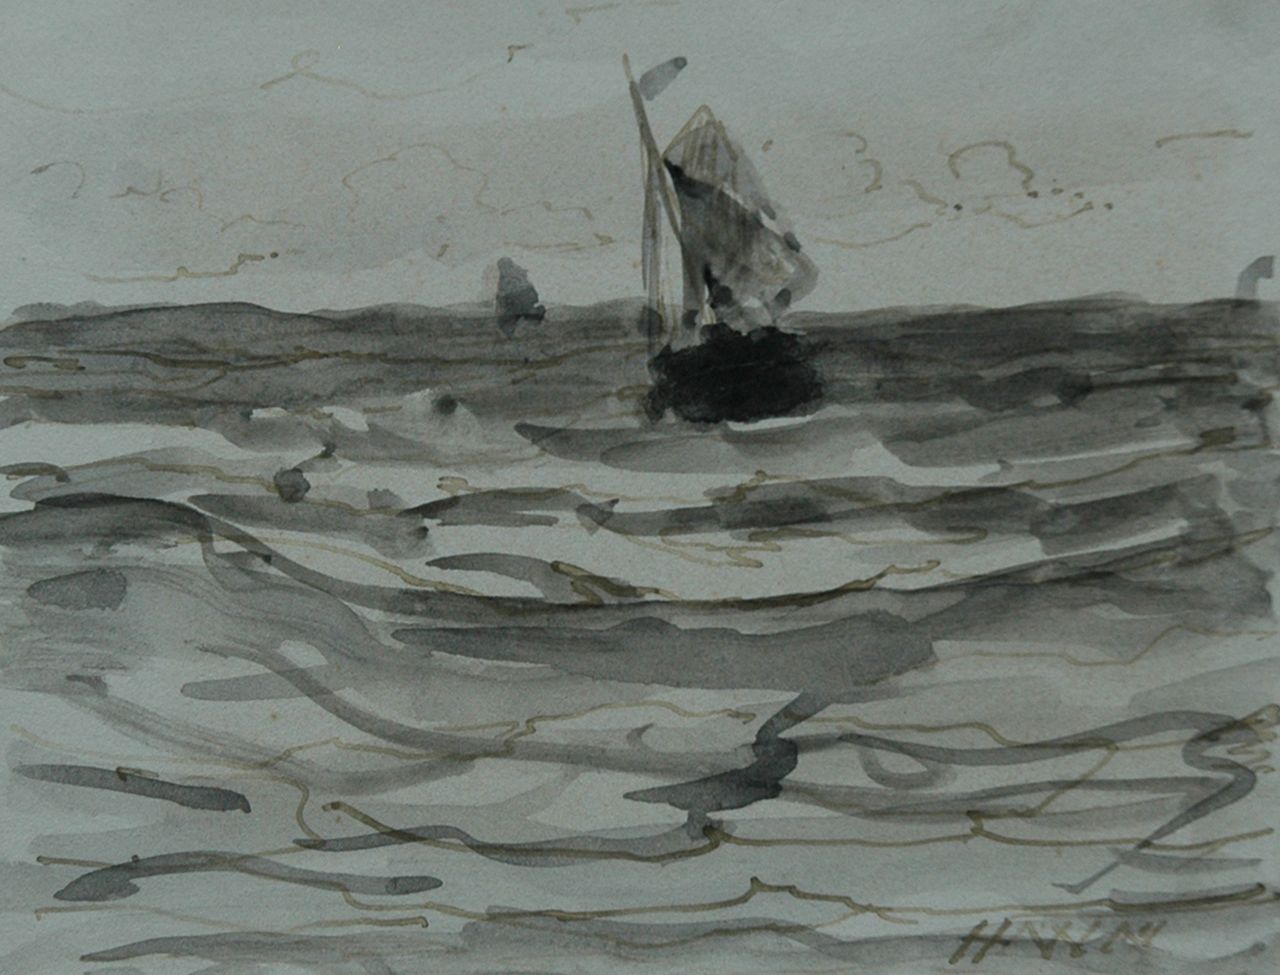 Mesdag H.W.  | Hendrik Willem Mesdag, Fishing boat at sea, Pinsel in schwarzer Tinte und Aquarell auf Papier 8,7 x 11,2 cm, signed l.r. with initials und dated 's January 1883'